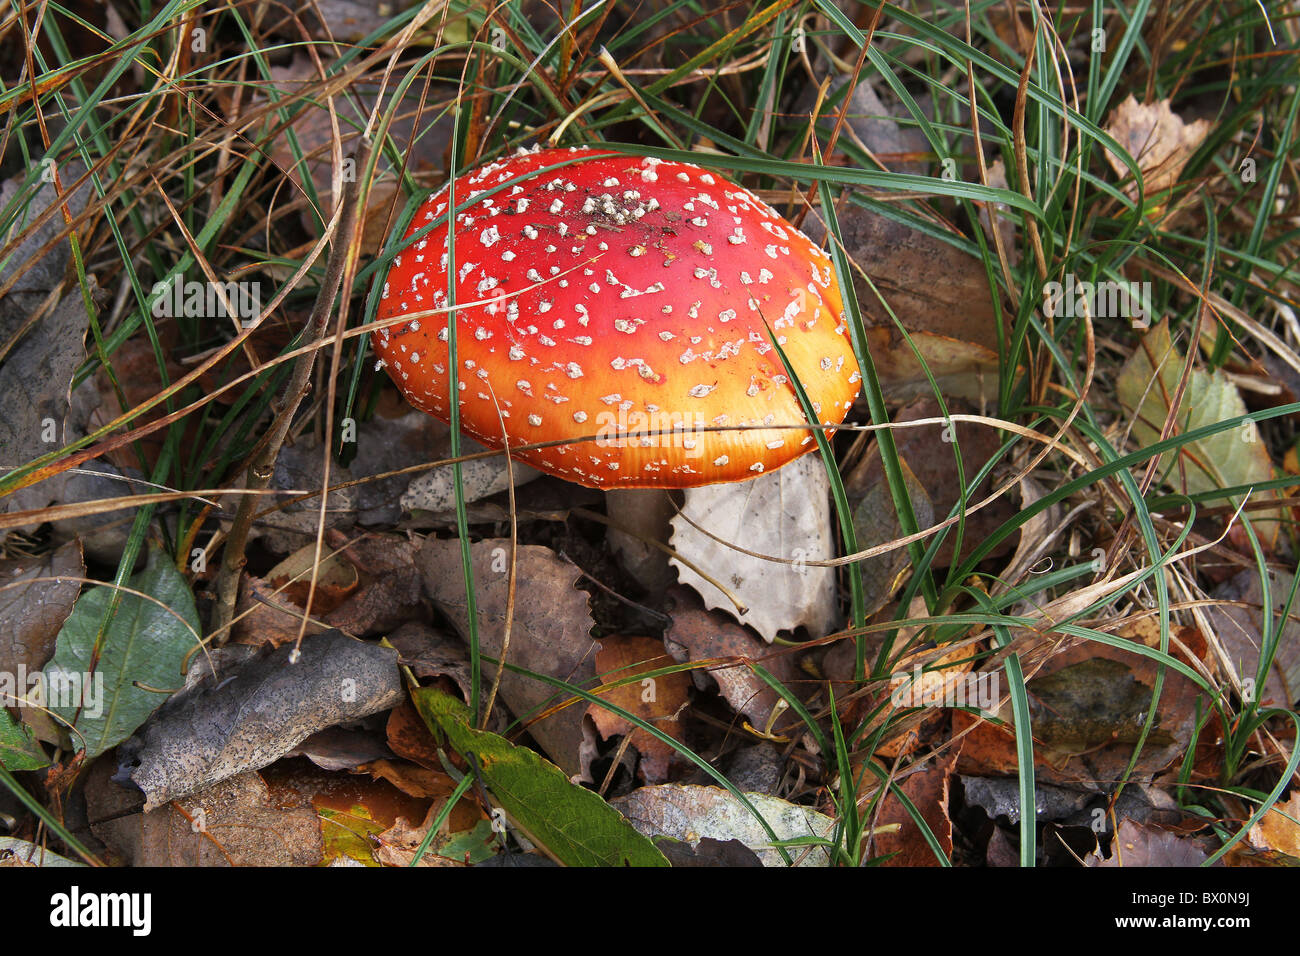 Agaric Fly toadstool dans caduques. Banque D'Images